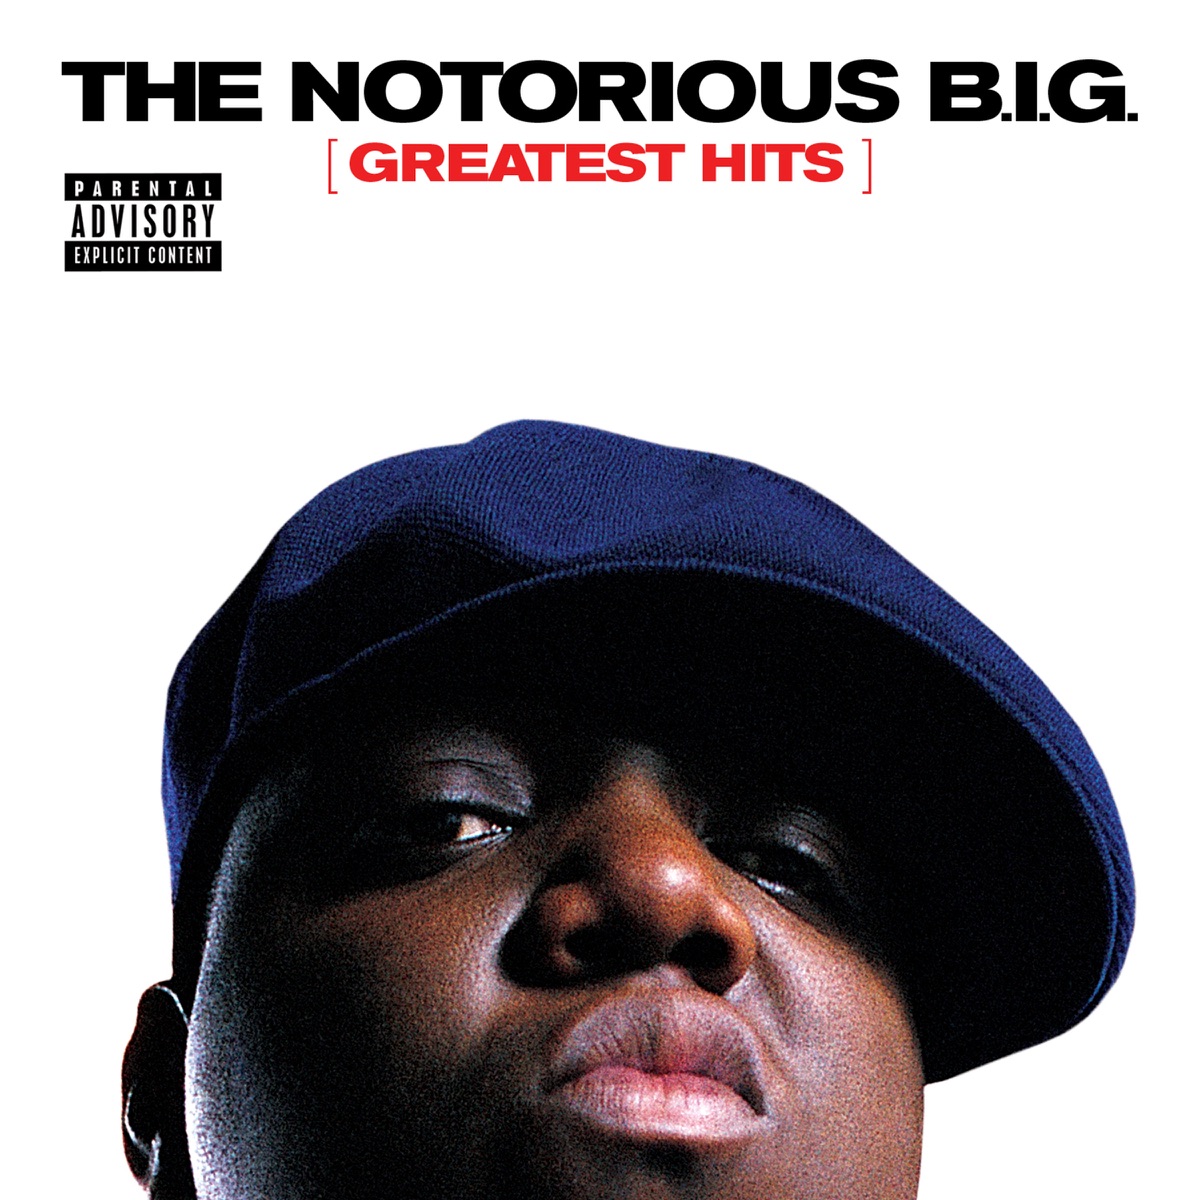 The Notorious B.I.G. - The Notorious B.I.G.: Greatest Hits